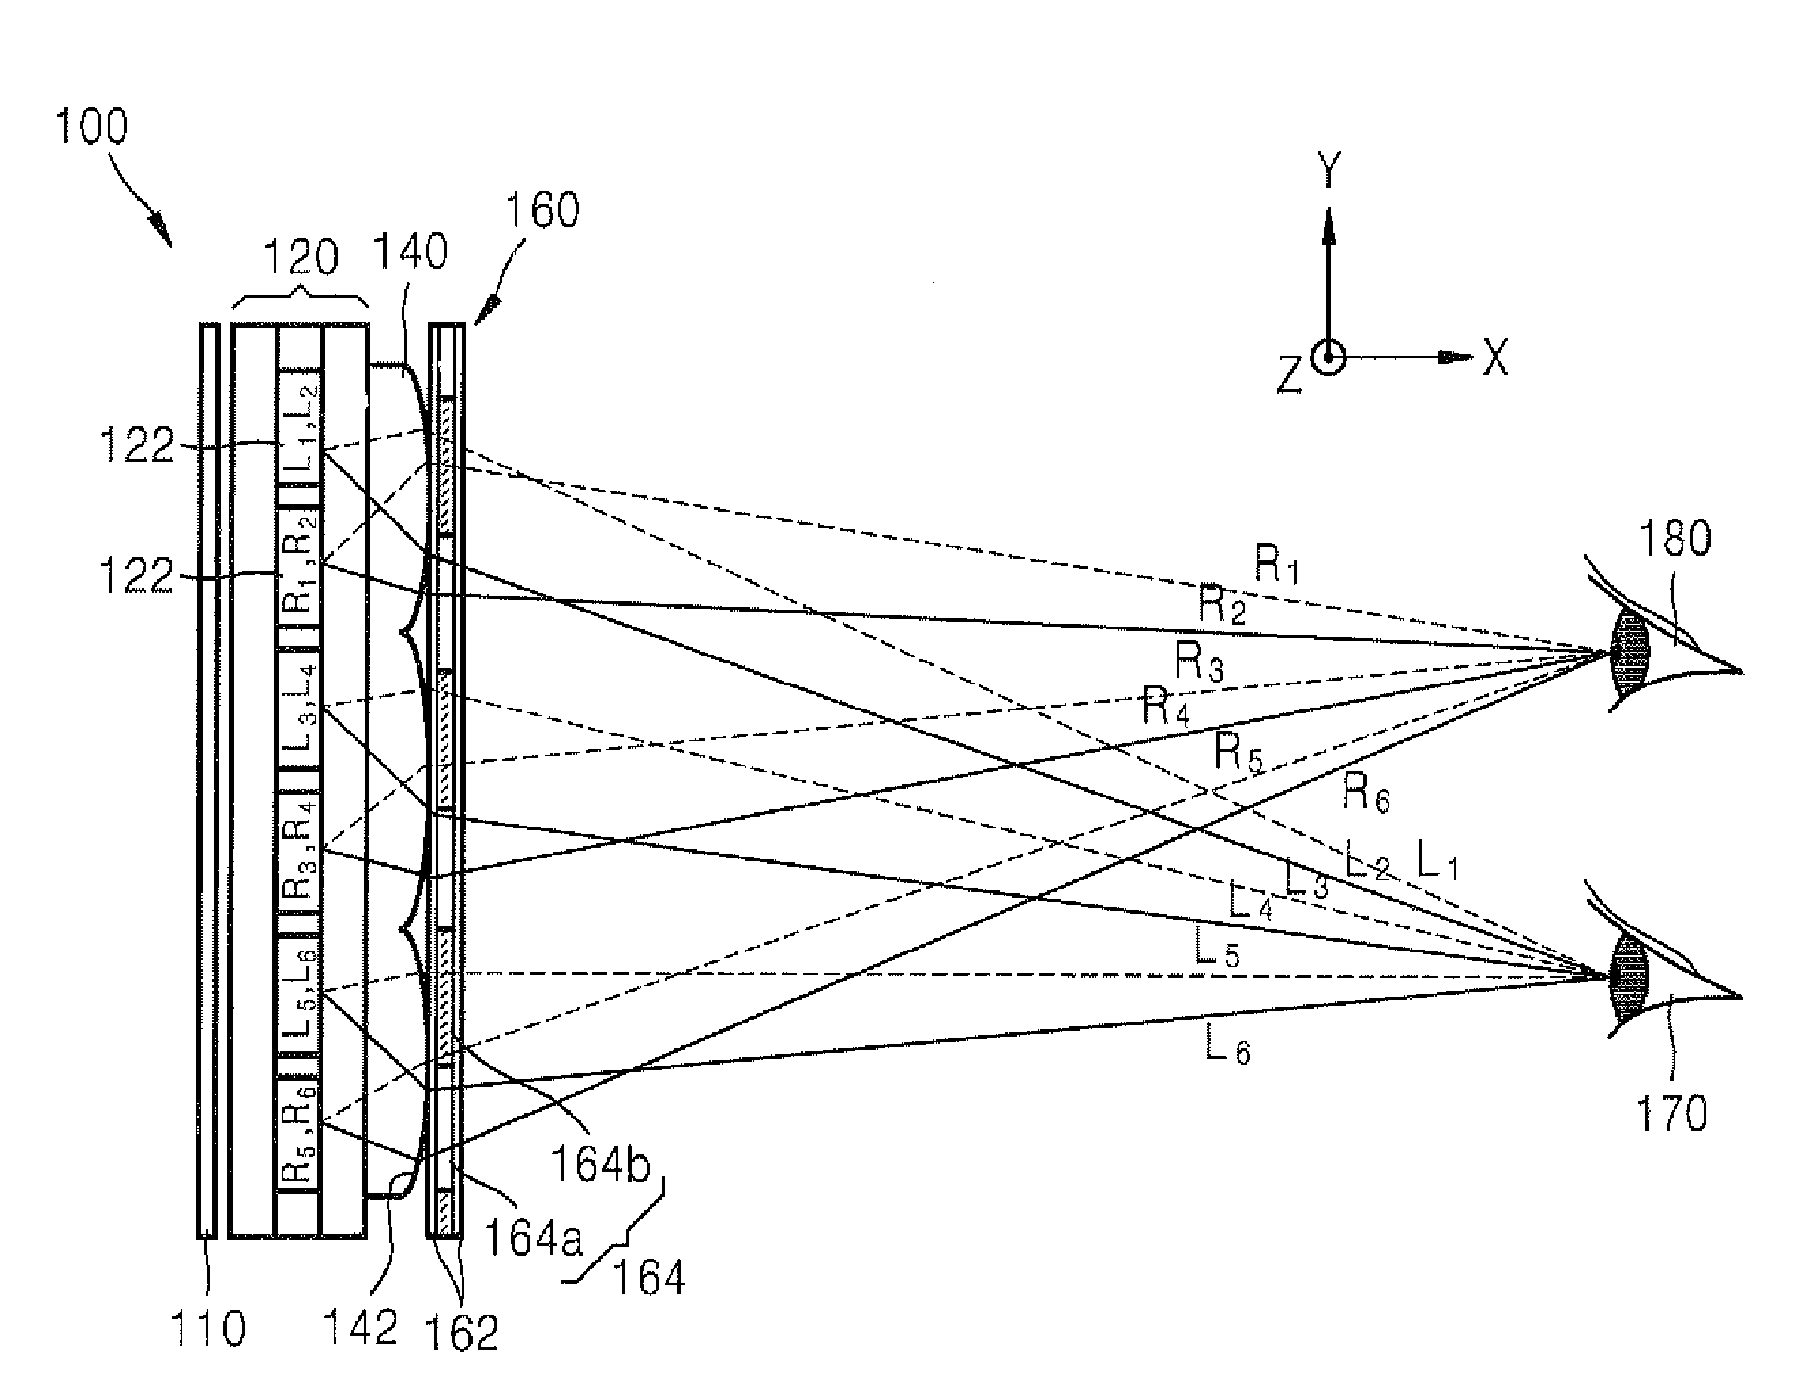 High resolution 2d/3d switchable display apparatus